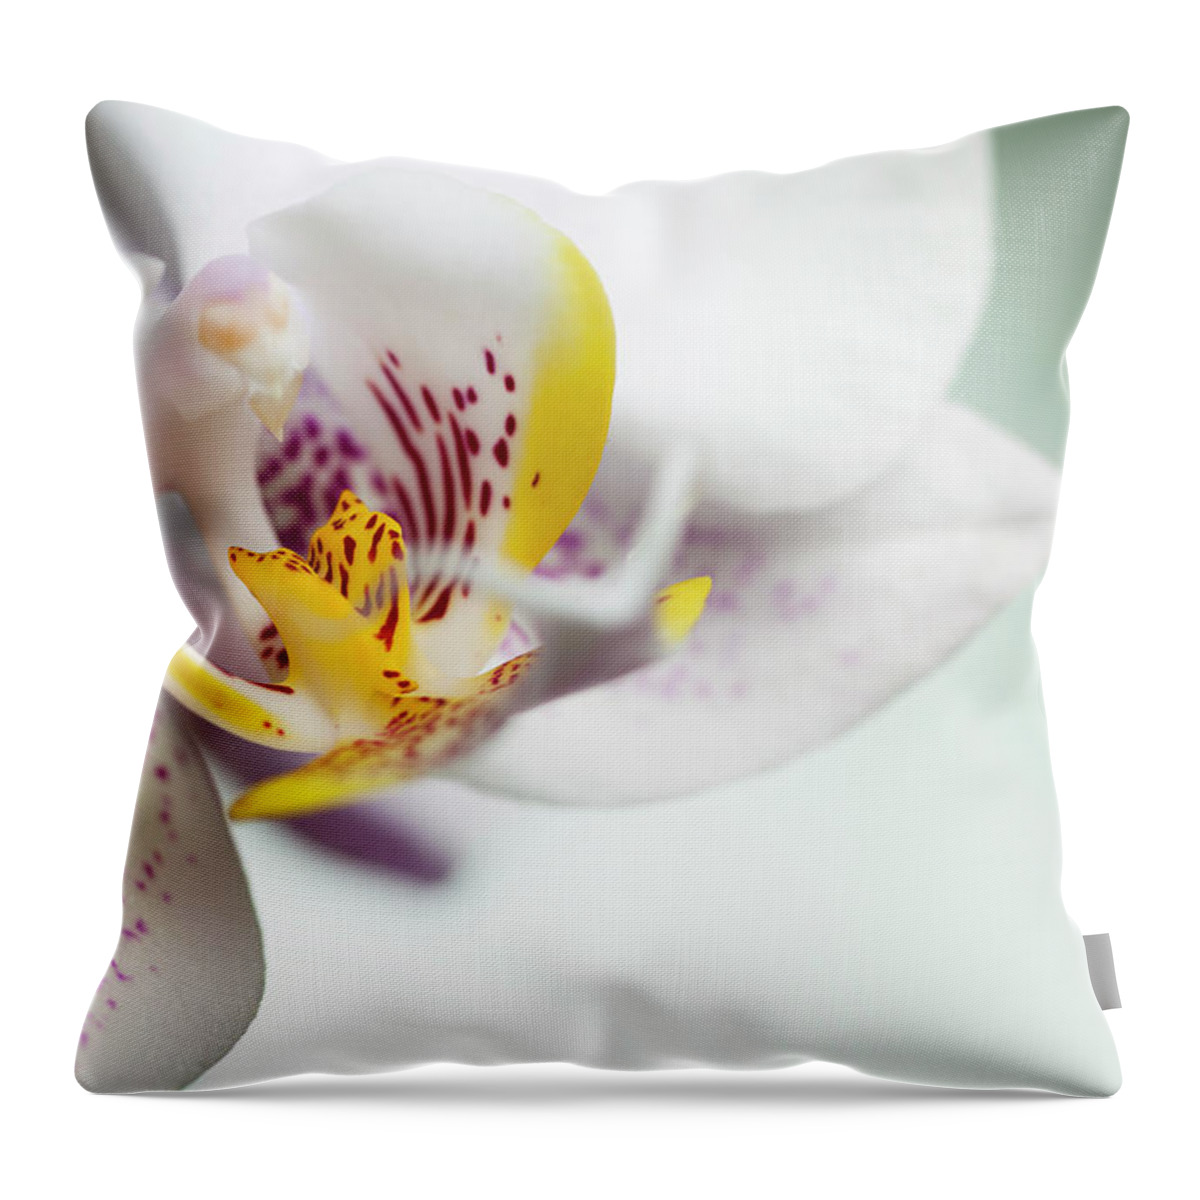 Purple Throw Pillow featuring the photograph Orchid by Mariusfm77